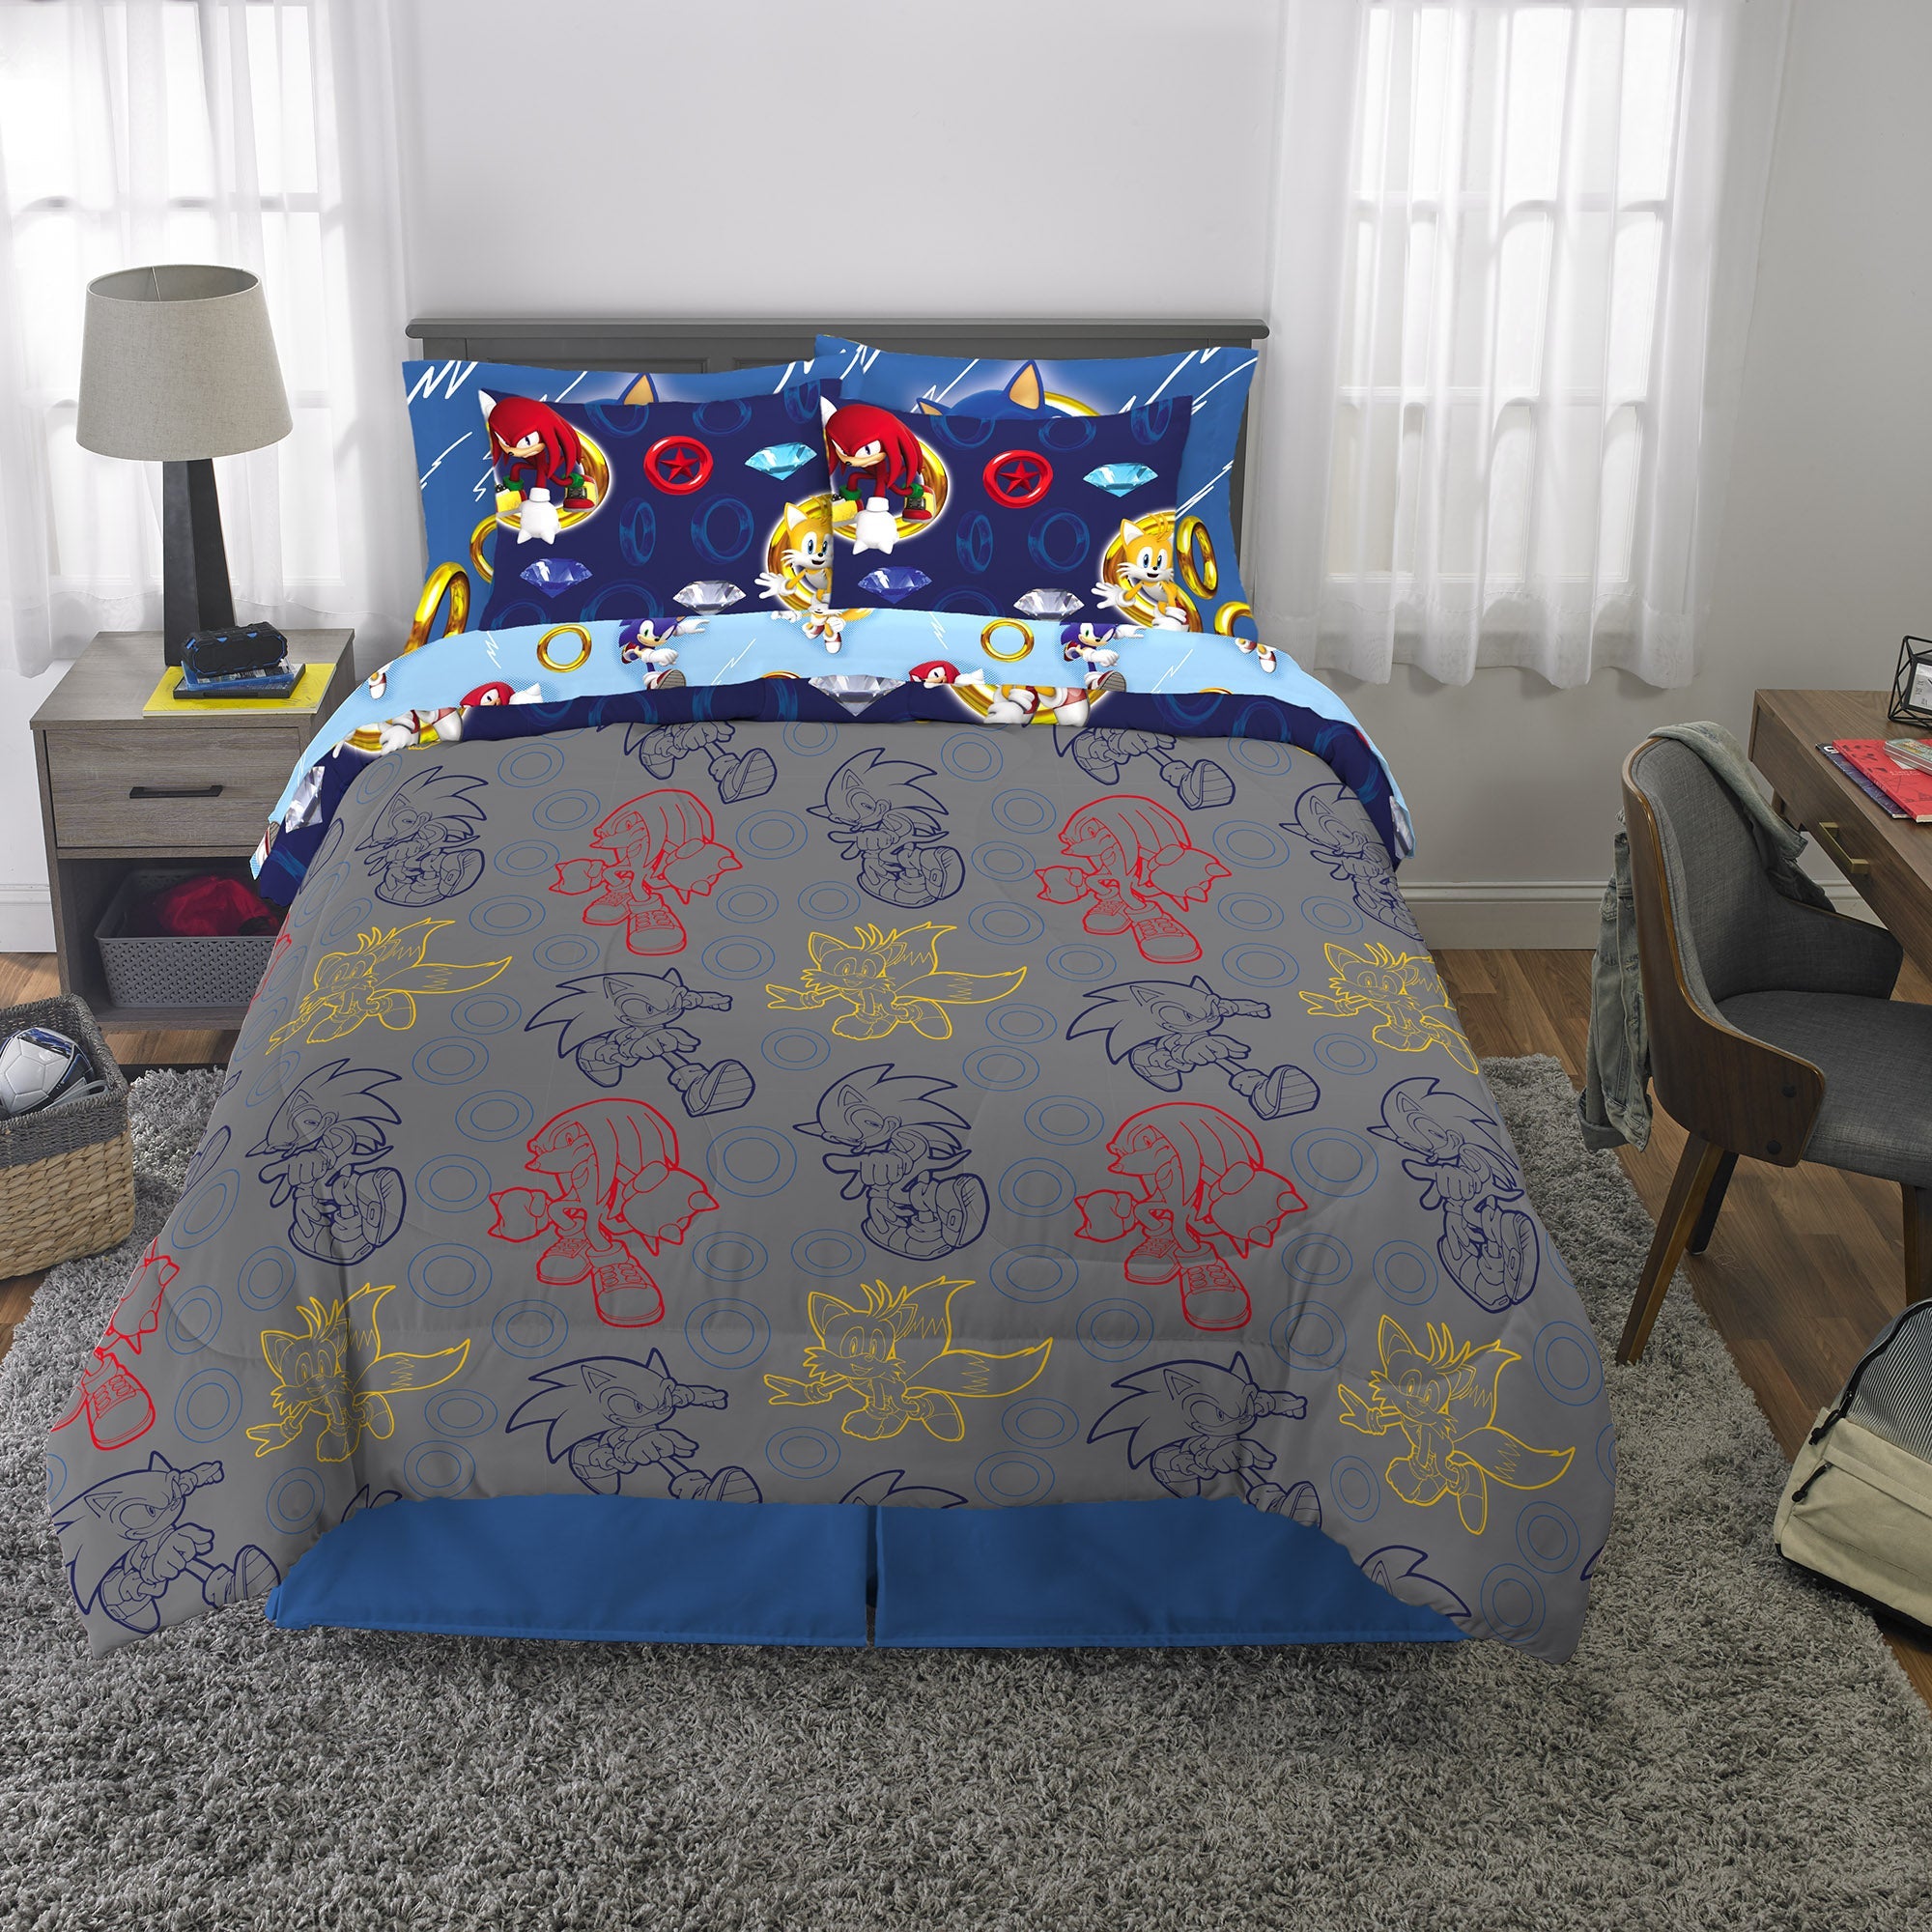 Sonic the Hedgehog Kids Full Bed in a Bag, Gaming Bedding, Comforter Sheets and Sham, Blue